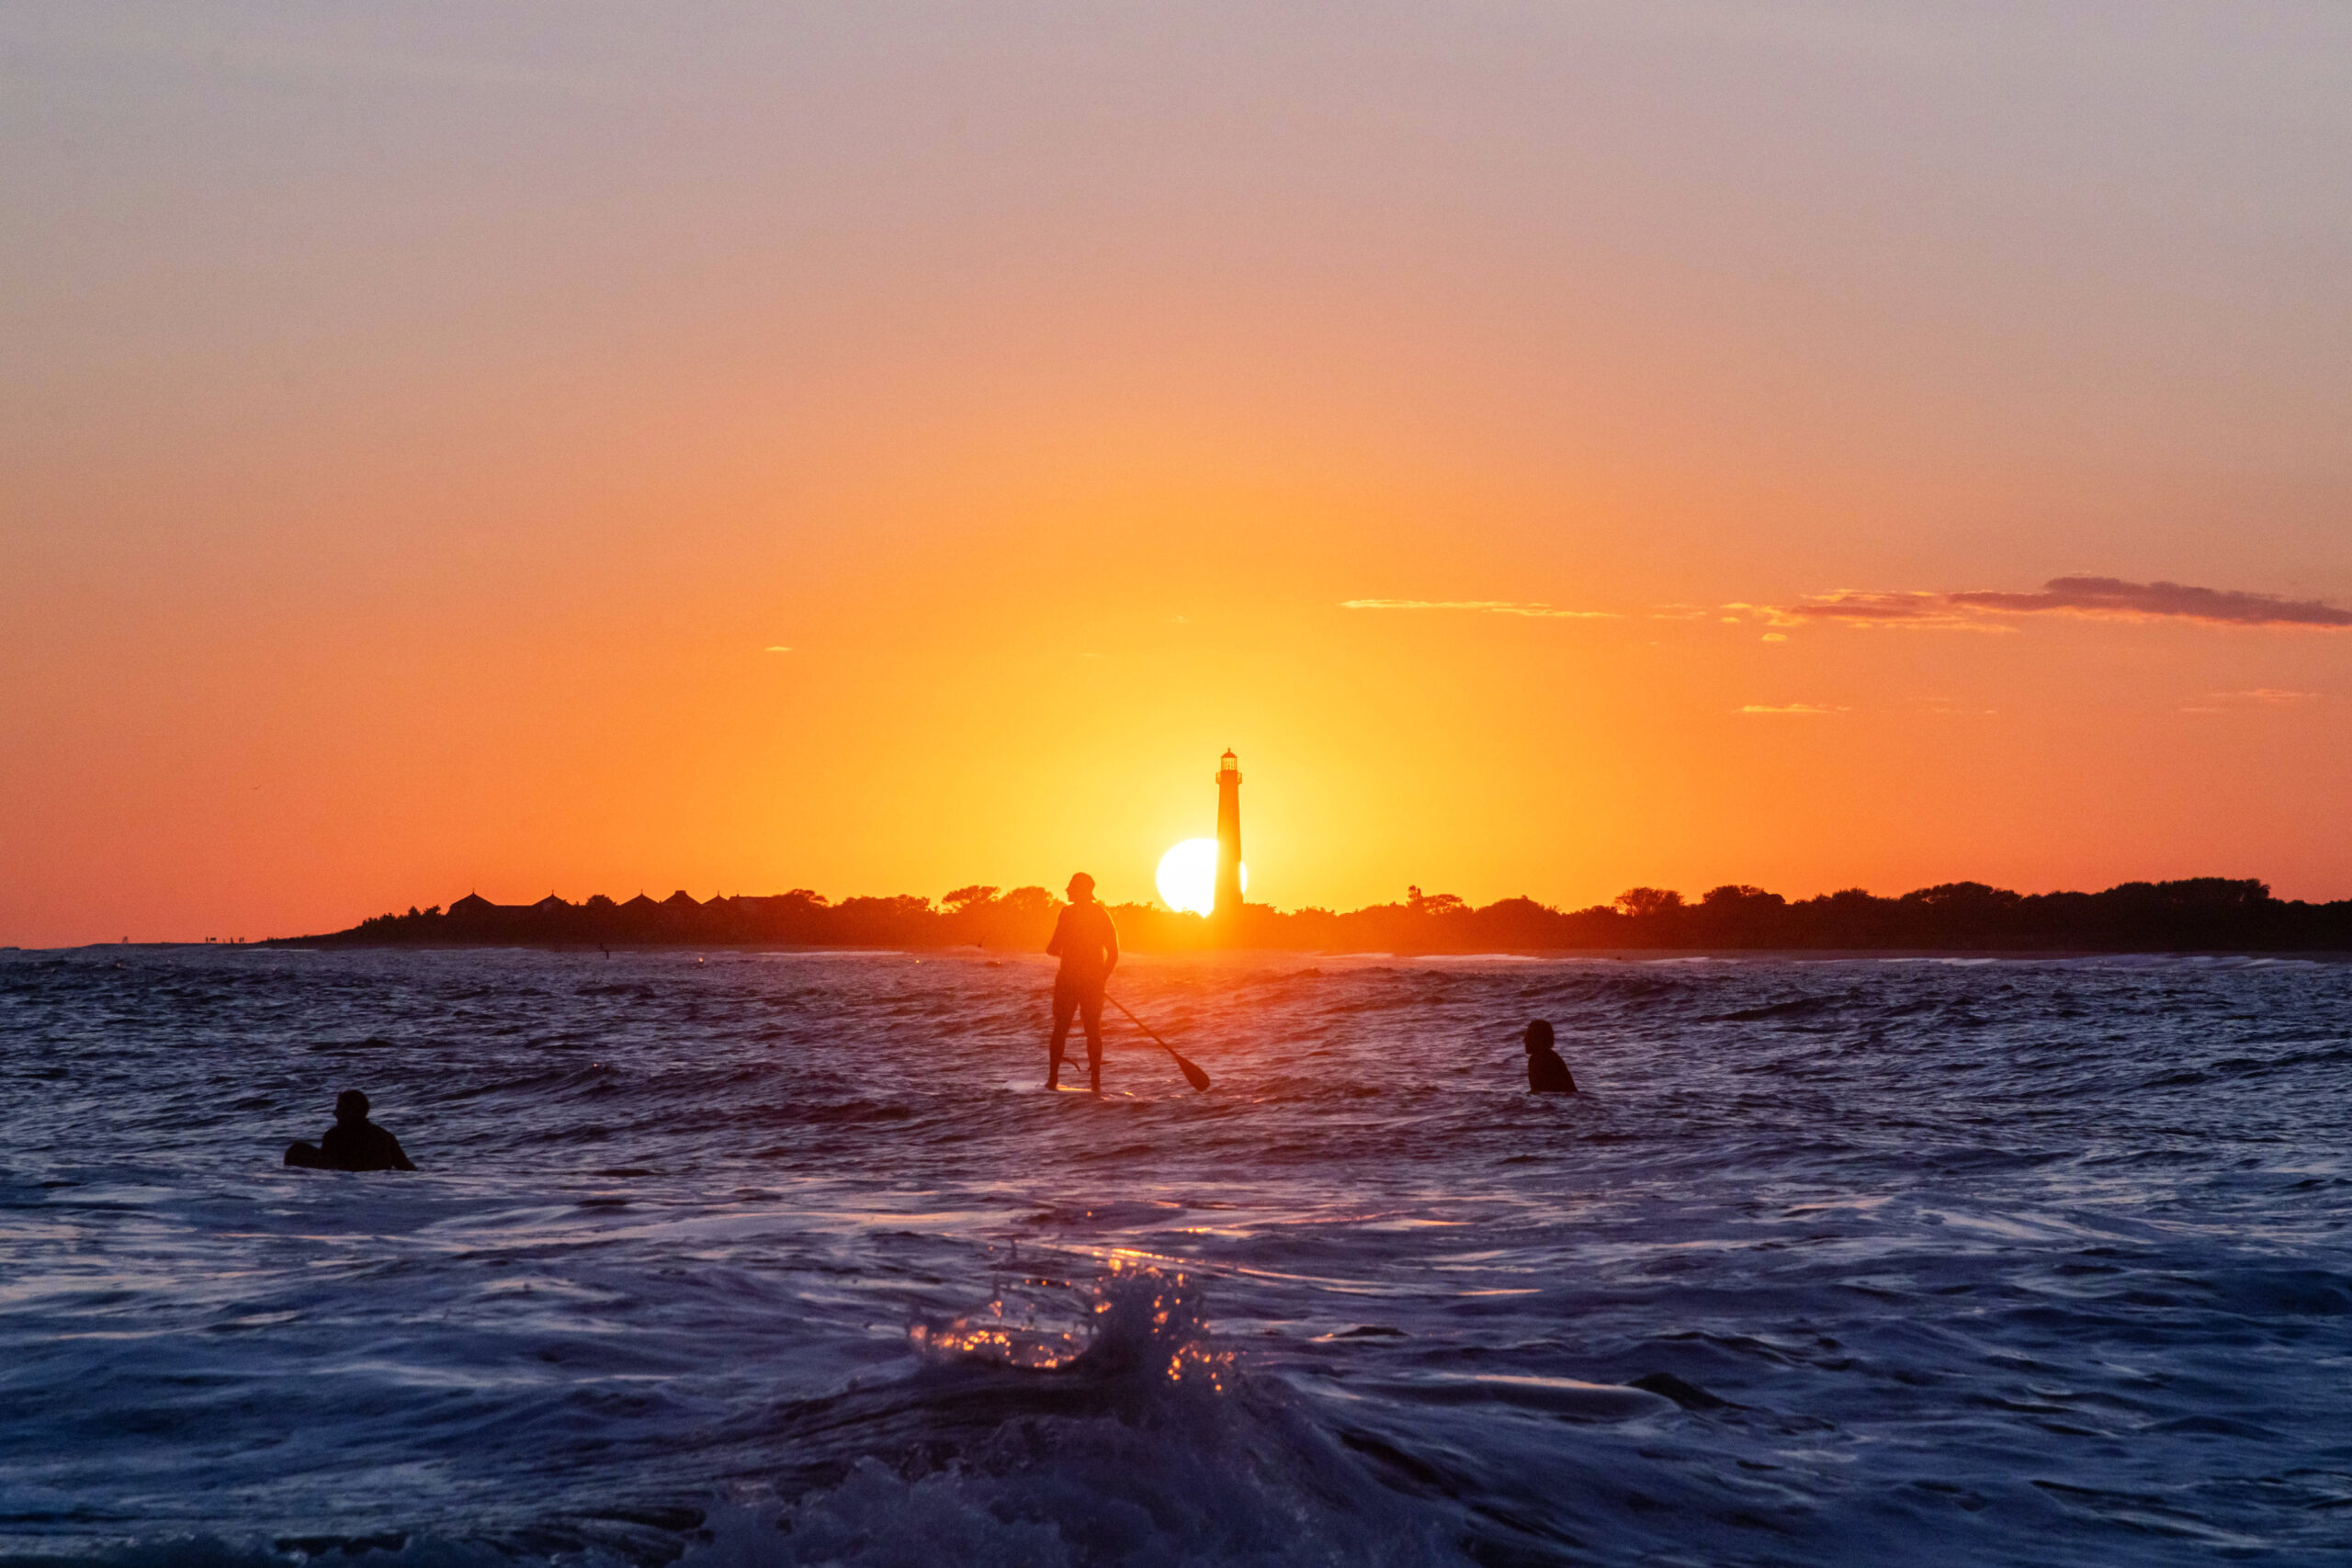 The sun setting directly behind the Cape May Lighthouse with surfers and a paddle boarder in the ocean